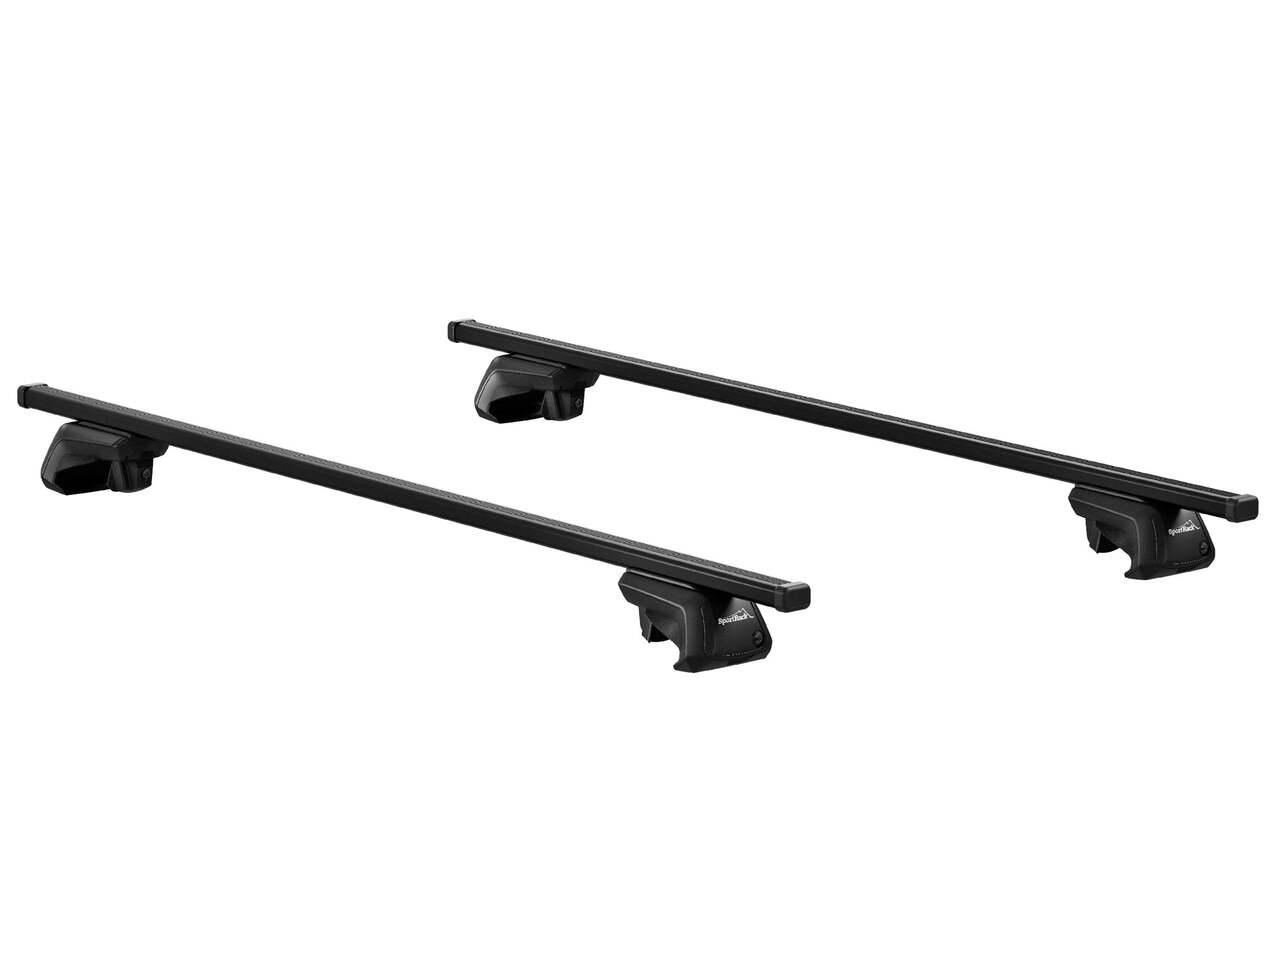 https://media-www.canadiantire.ca/product/automotive/automotive-outdoor-adventure/auto-travel-storage/0401770/sportrack-complete-roof-rack-system-118-cm-6f4be4c1-a3b0-4d51-bb02-9609e3bf99ff-jpgrendition.jpg?imdensity=1&imwidth=1244&impolicy=mZoom